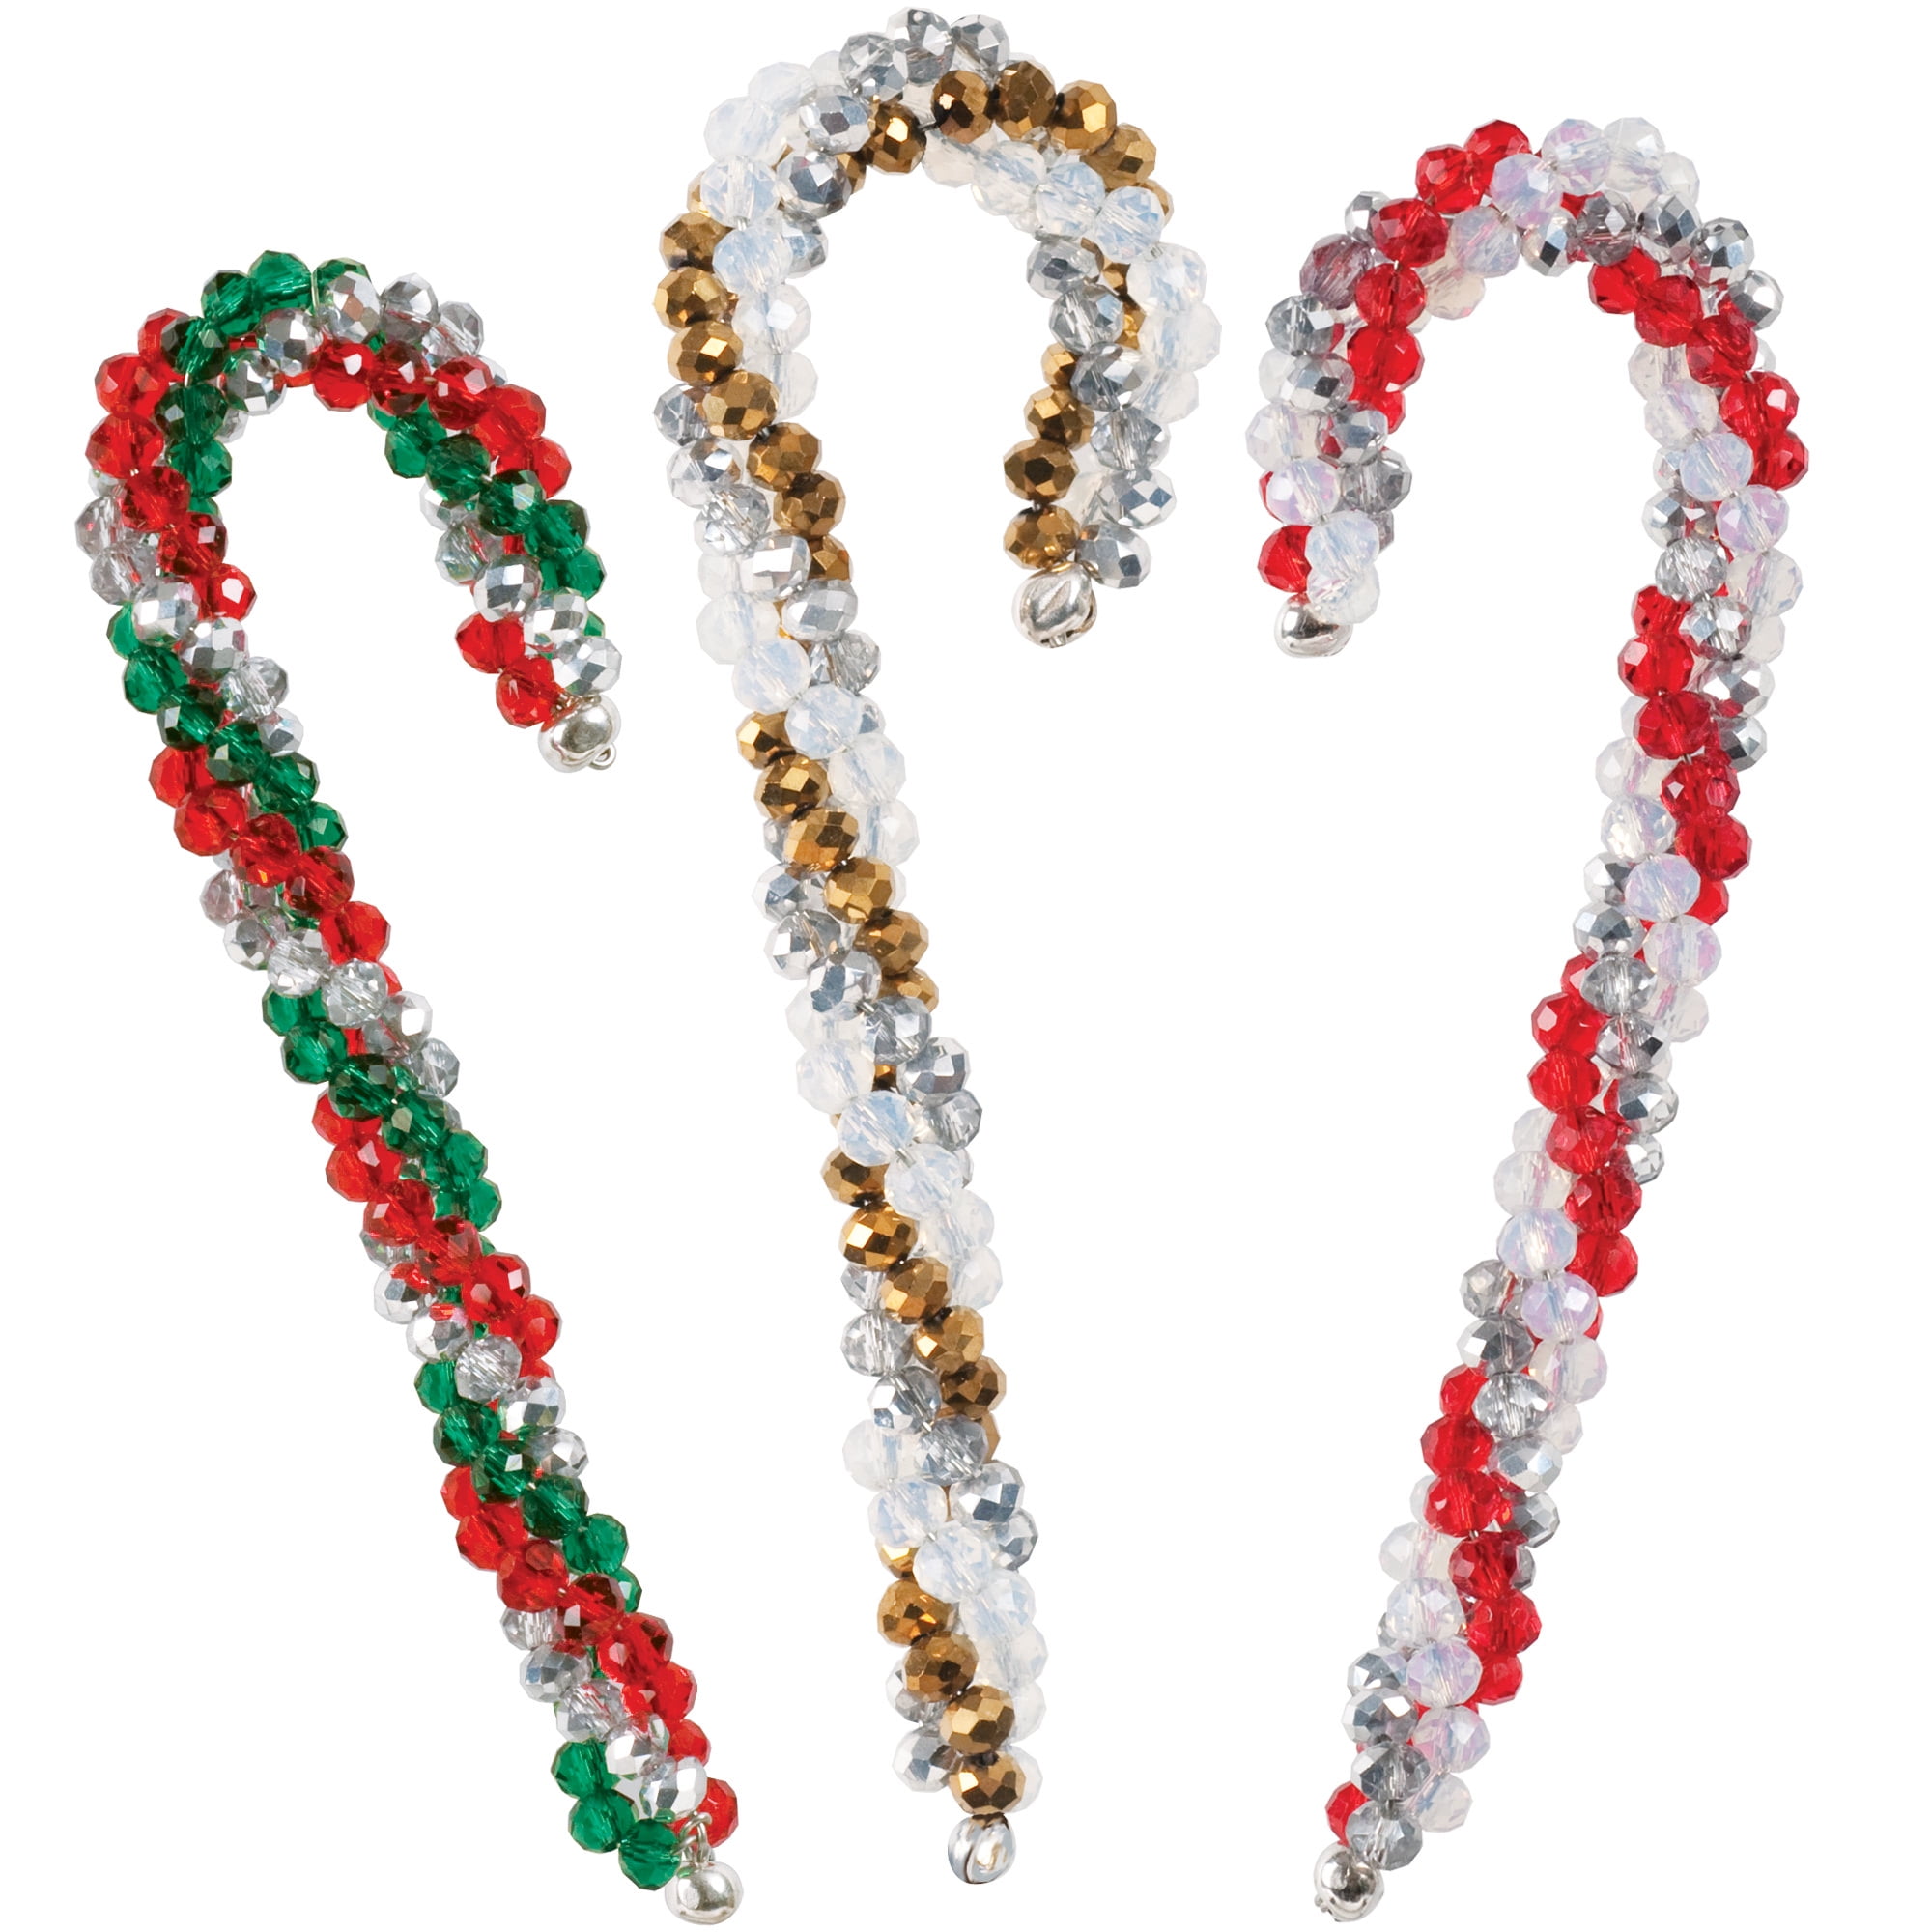 Holiday Beaded Ornament Kit-Mini Candy Canes 2" Makes 24 